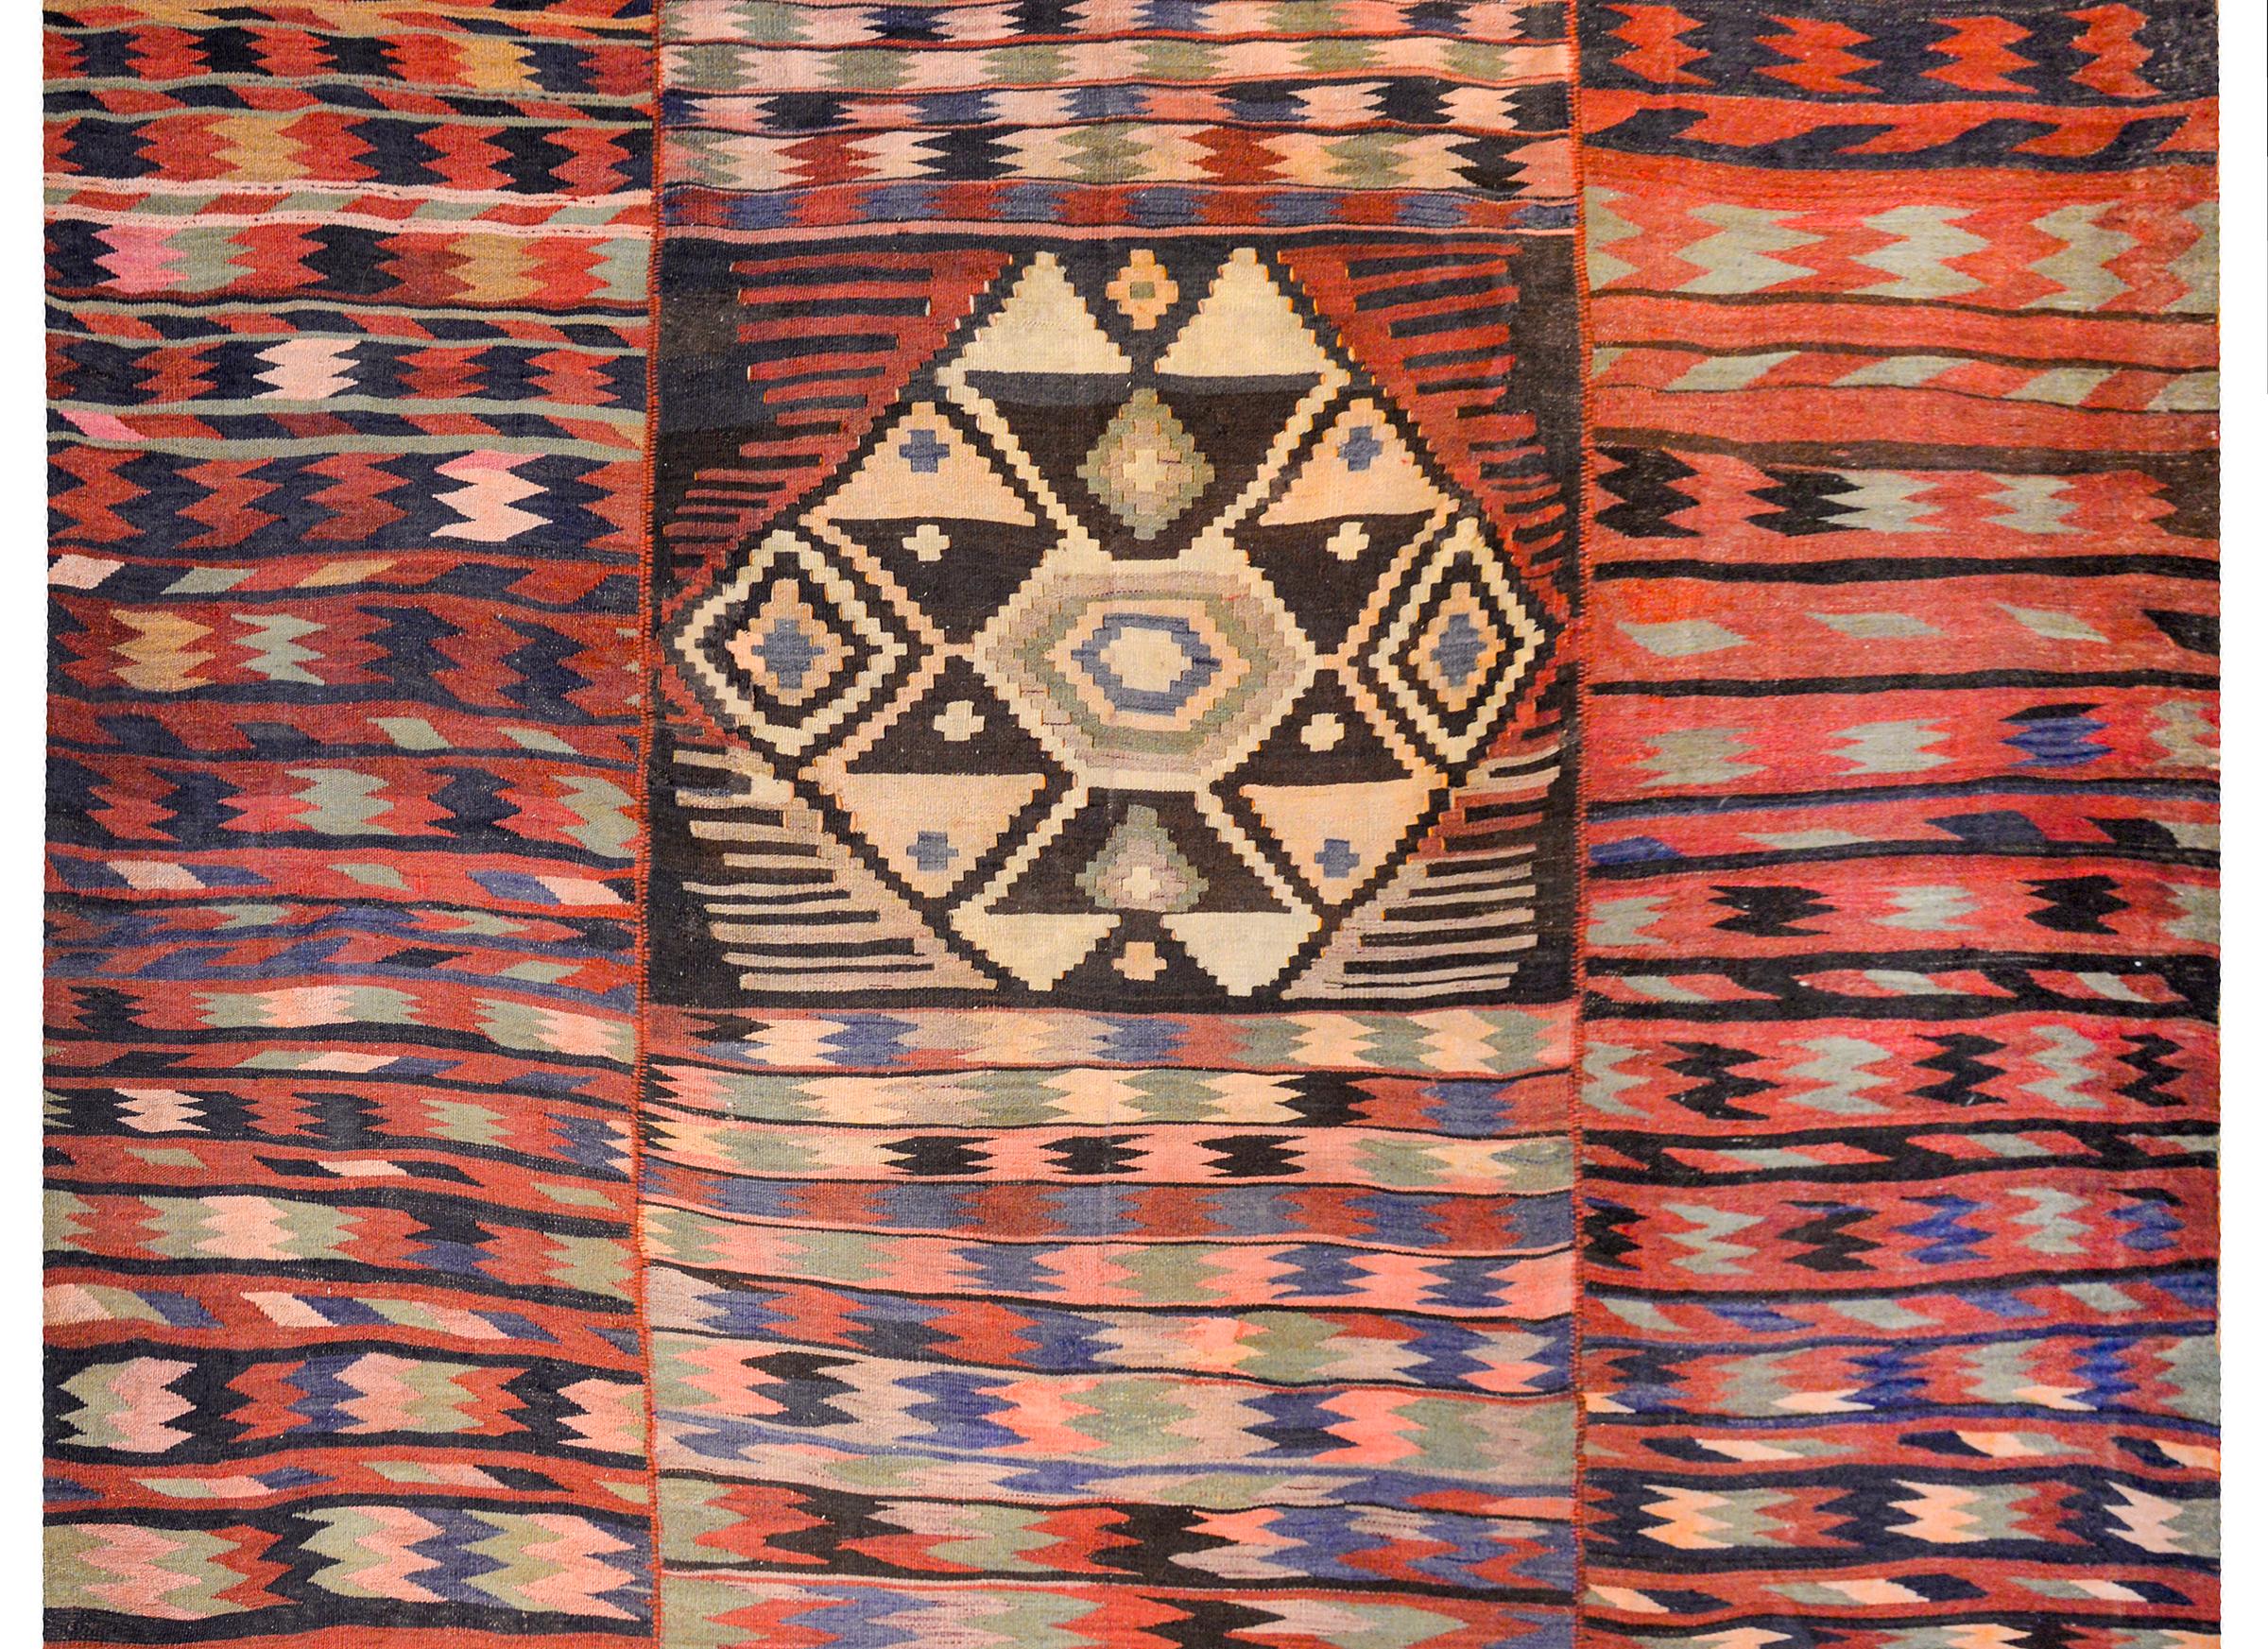 An unusual mid-20th century Persian Kirmanshah kilim rug with a beautiful all-over multi-colored zigzag pattern woven in three narrow strips combined to create a larger rug. A large hexagonal medallion lies in the center, created from multiple